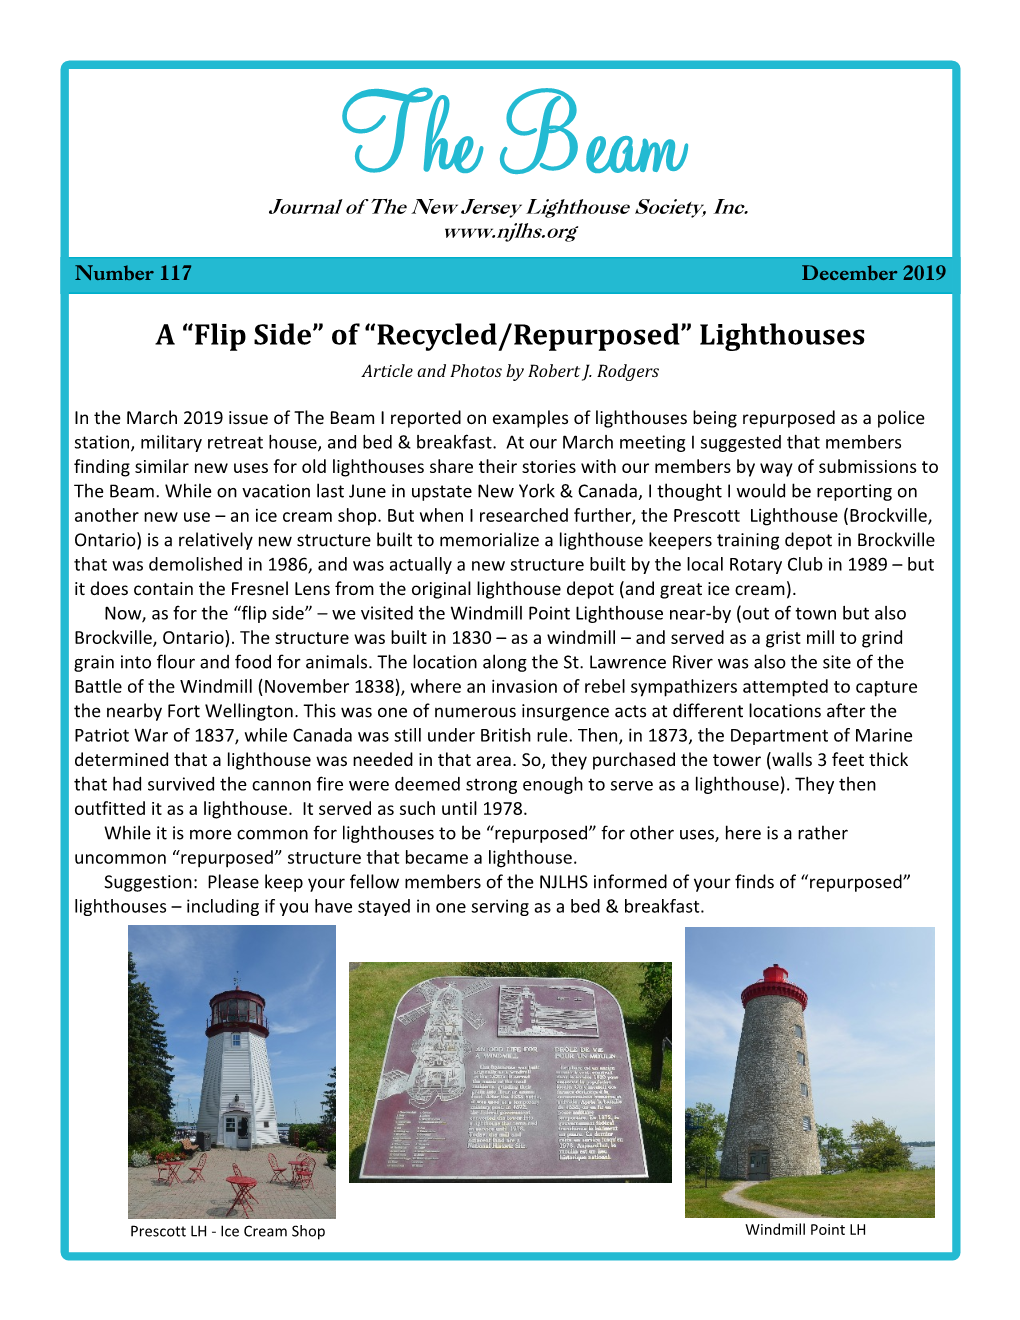 Of “Recycled/Repurposed” Lighthouses Article and Photos by Robert J